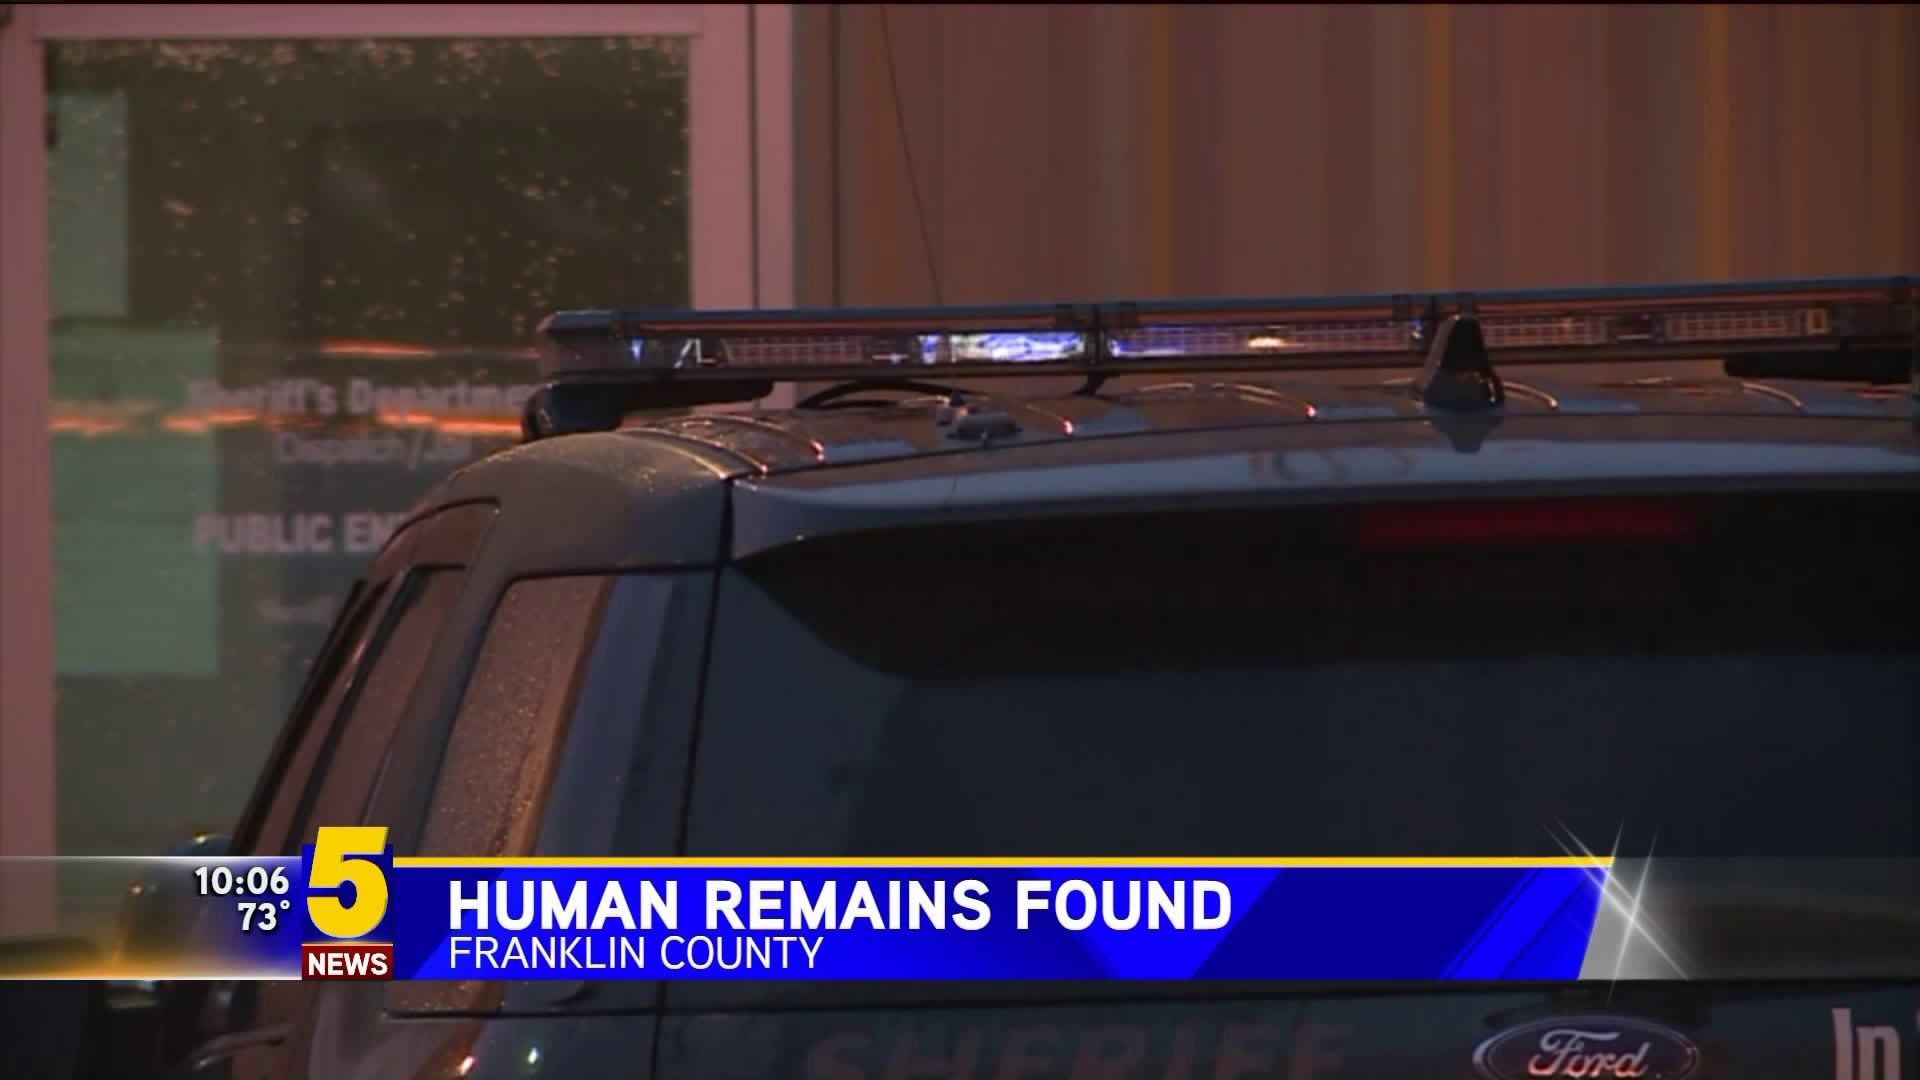 Human Remains Found in Franklin County